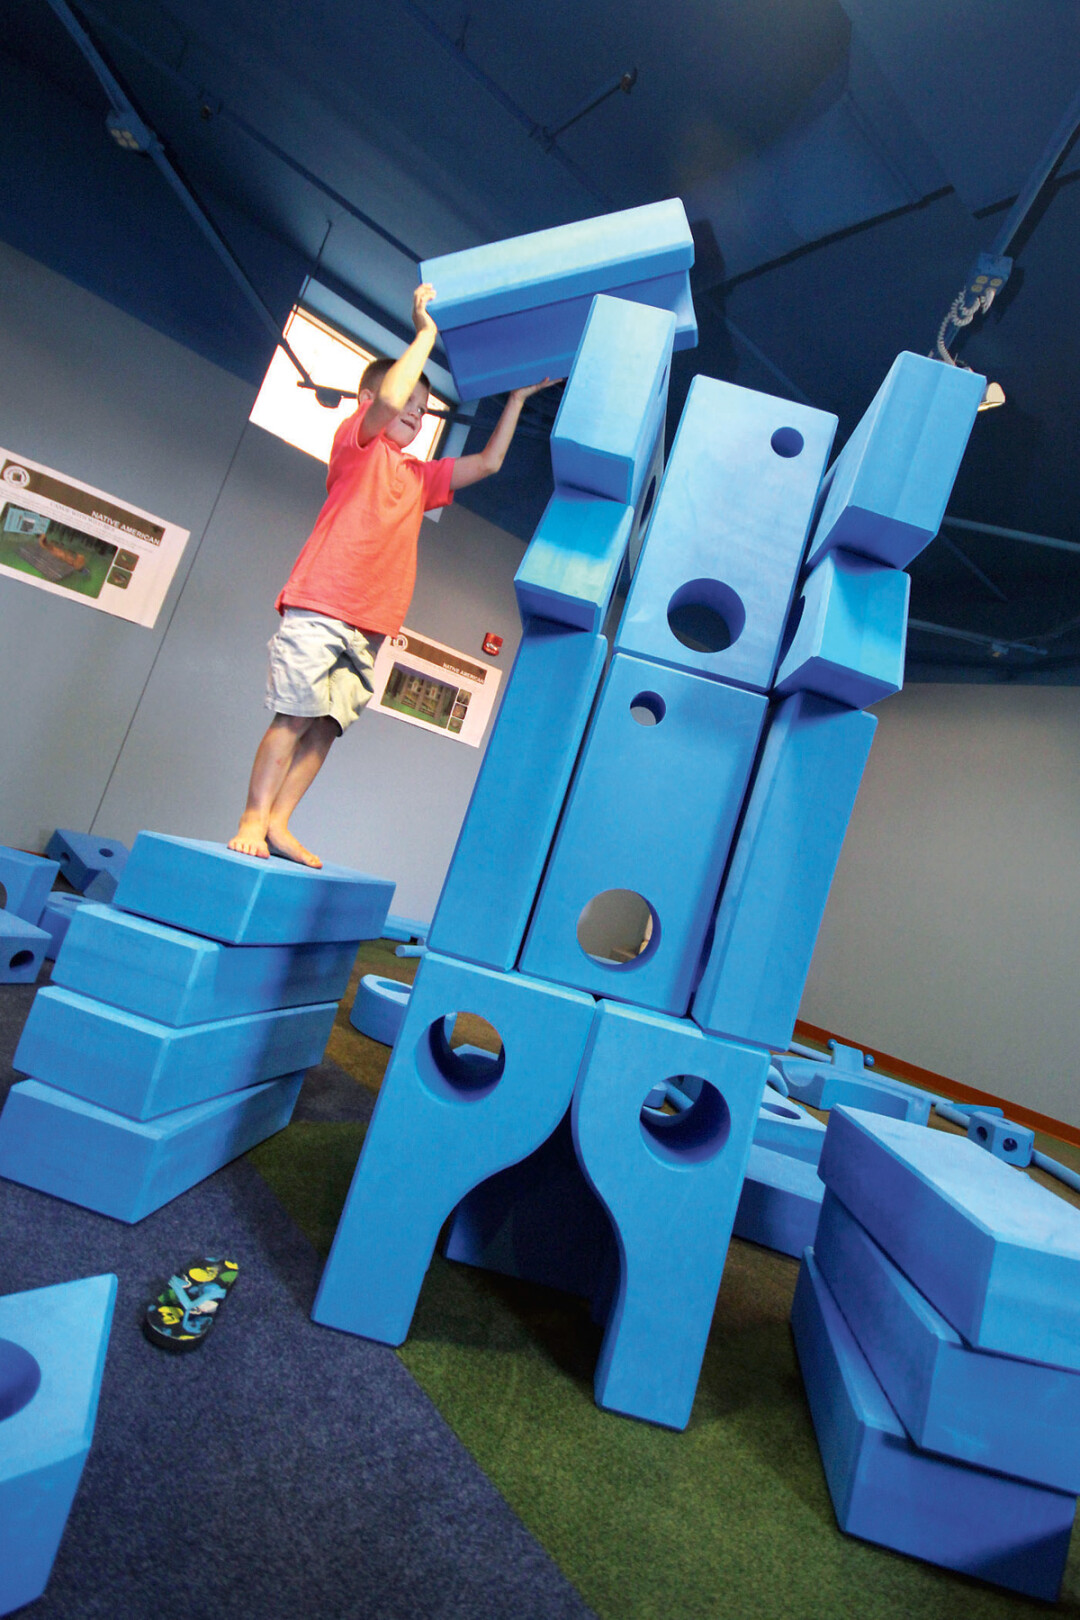 THE IMAGINATION PLAYGROUND AT THE CHILDREN’S MUSEUM OF EAU CLAIRE – A SET OF OVERSIZED BLOCKS – IS GREAT FOR IMAGINATIVE PLAY.